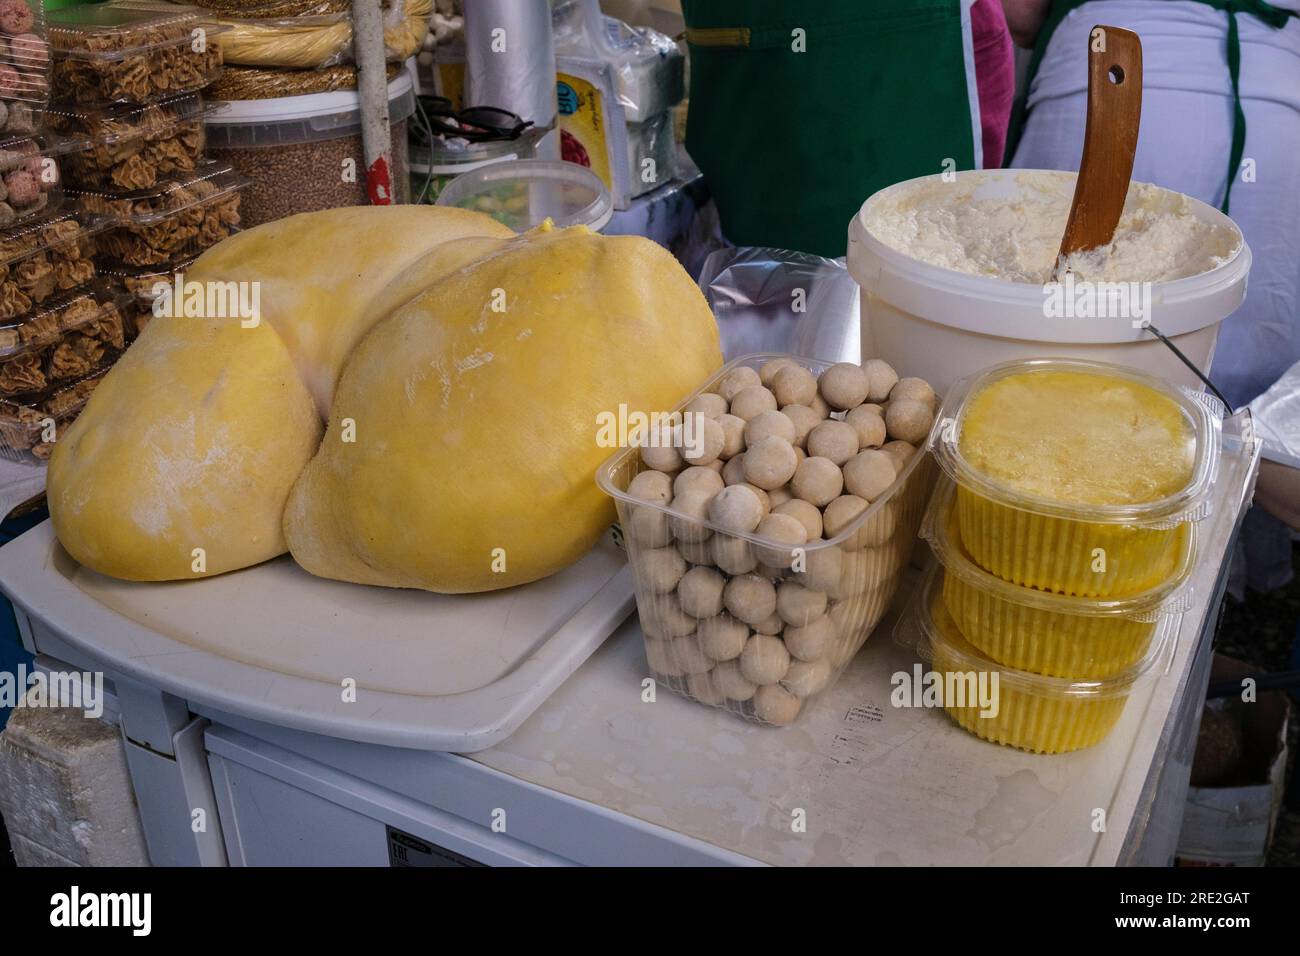 Kazakhstan, Almaty. Green Bazaar, Sheep's Stomach Used to Store Butter. Stock Photo